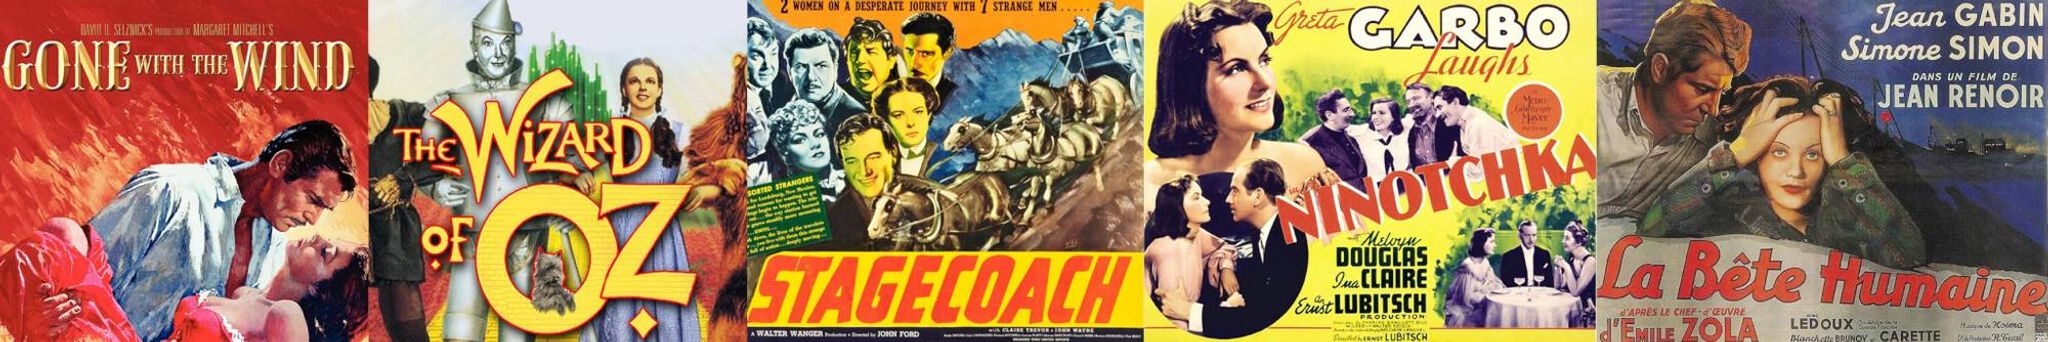 Here are a few films that premiered in 1939: Gone with the Wind, The Wizard of Oz, Stagecoach, Ninotchka, Mr. Smith Goes to Washington, The Rules of the Game, Wuthering Heights, Of Mice and Men, Gunga Din, Dark Victory, Beau Geste, The Roaring Twenties, Each Dawn I Die, to name a few.